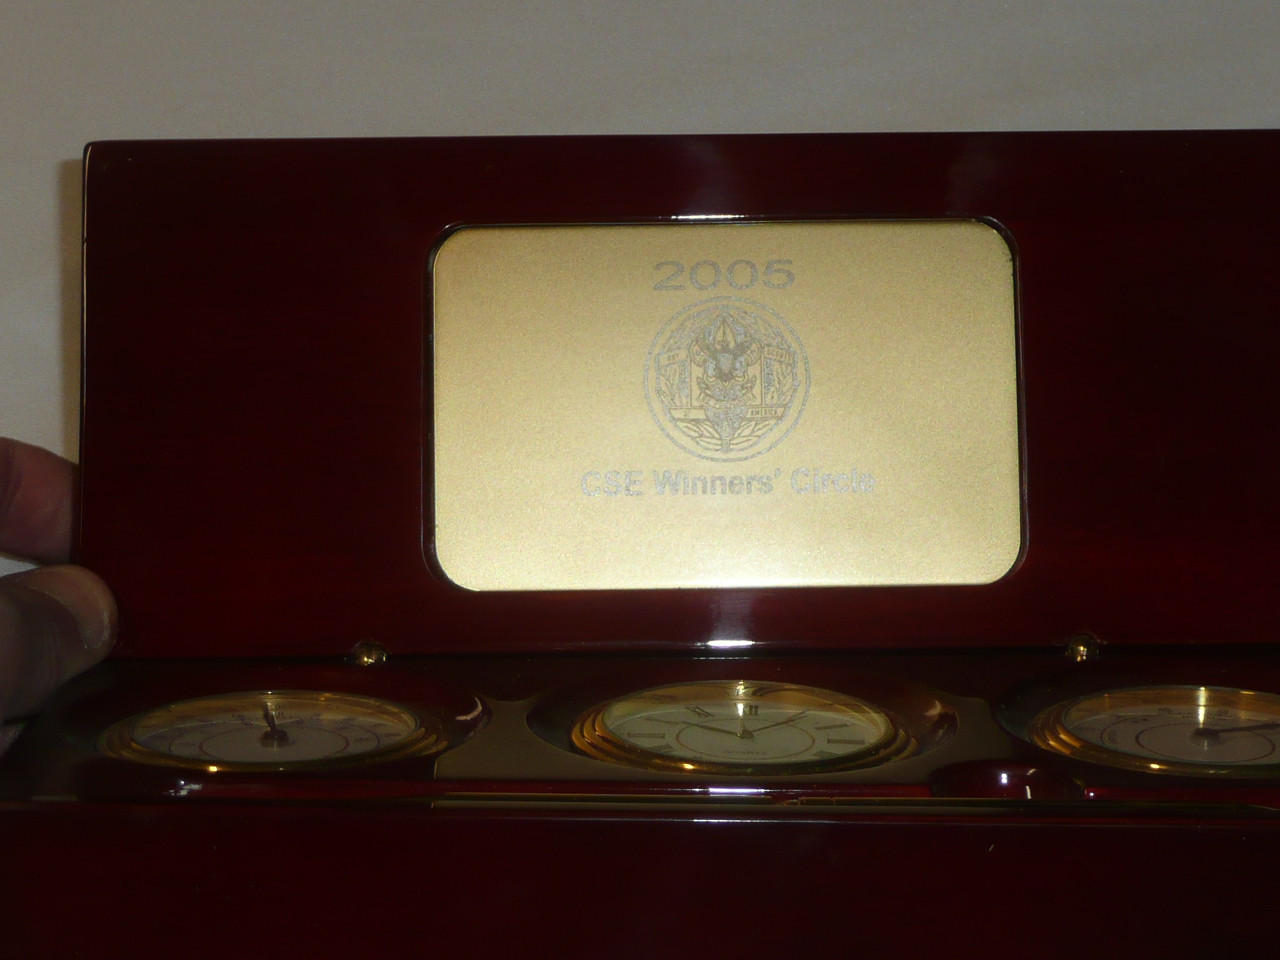 2005 Chief Scout Executive's Winners Circle Laquered Wood Box with Pen, Clock and Barometer